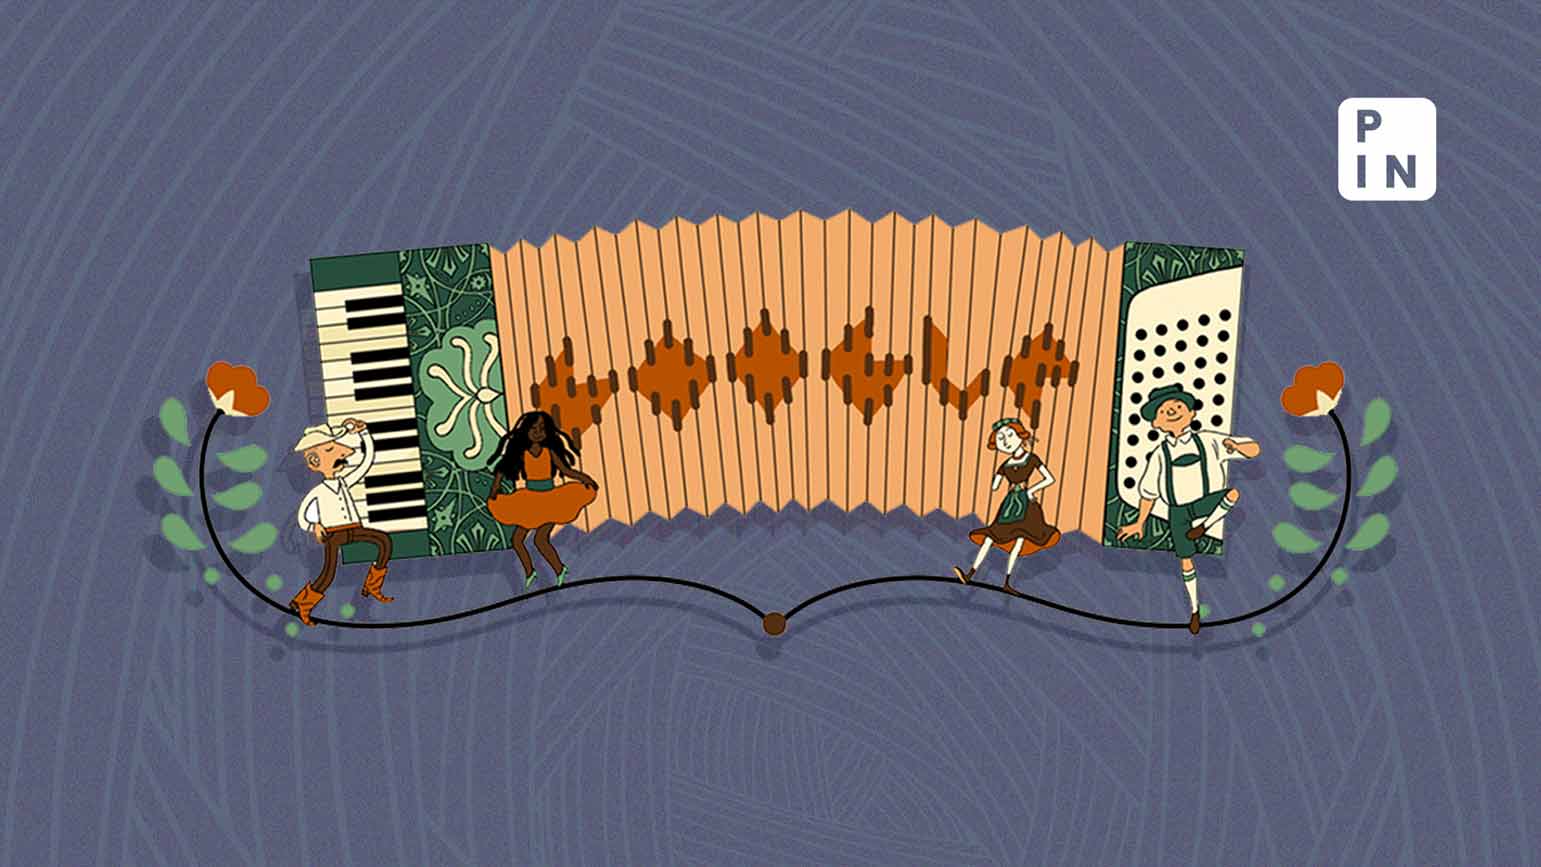 Google marks accordion’s patent anniversary with doodle